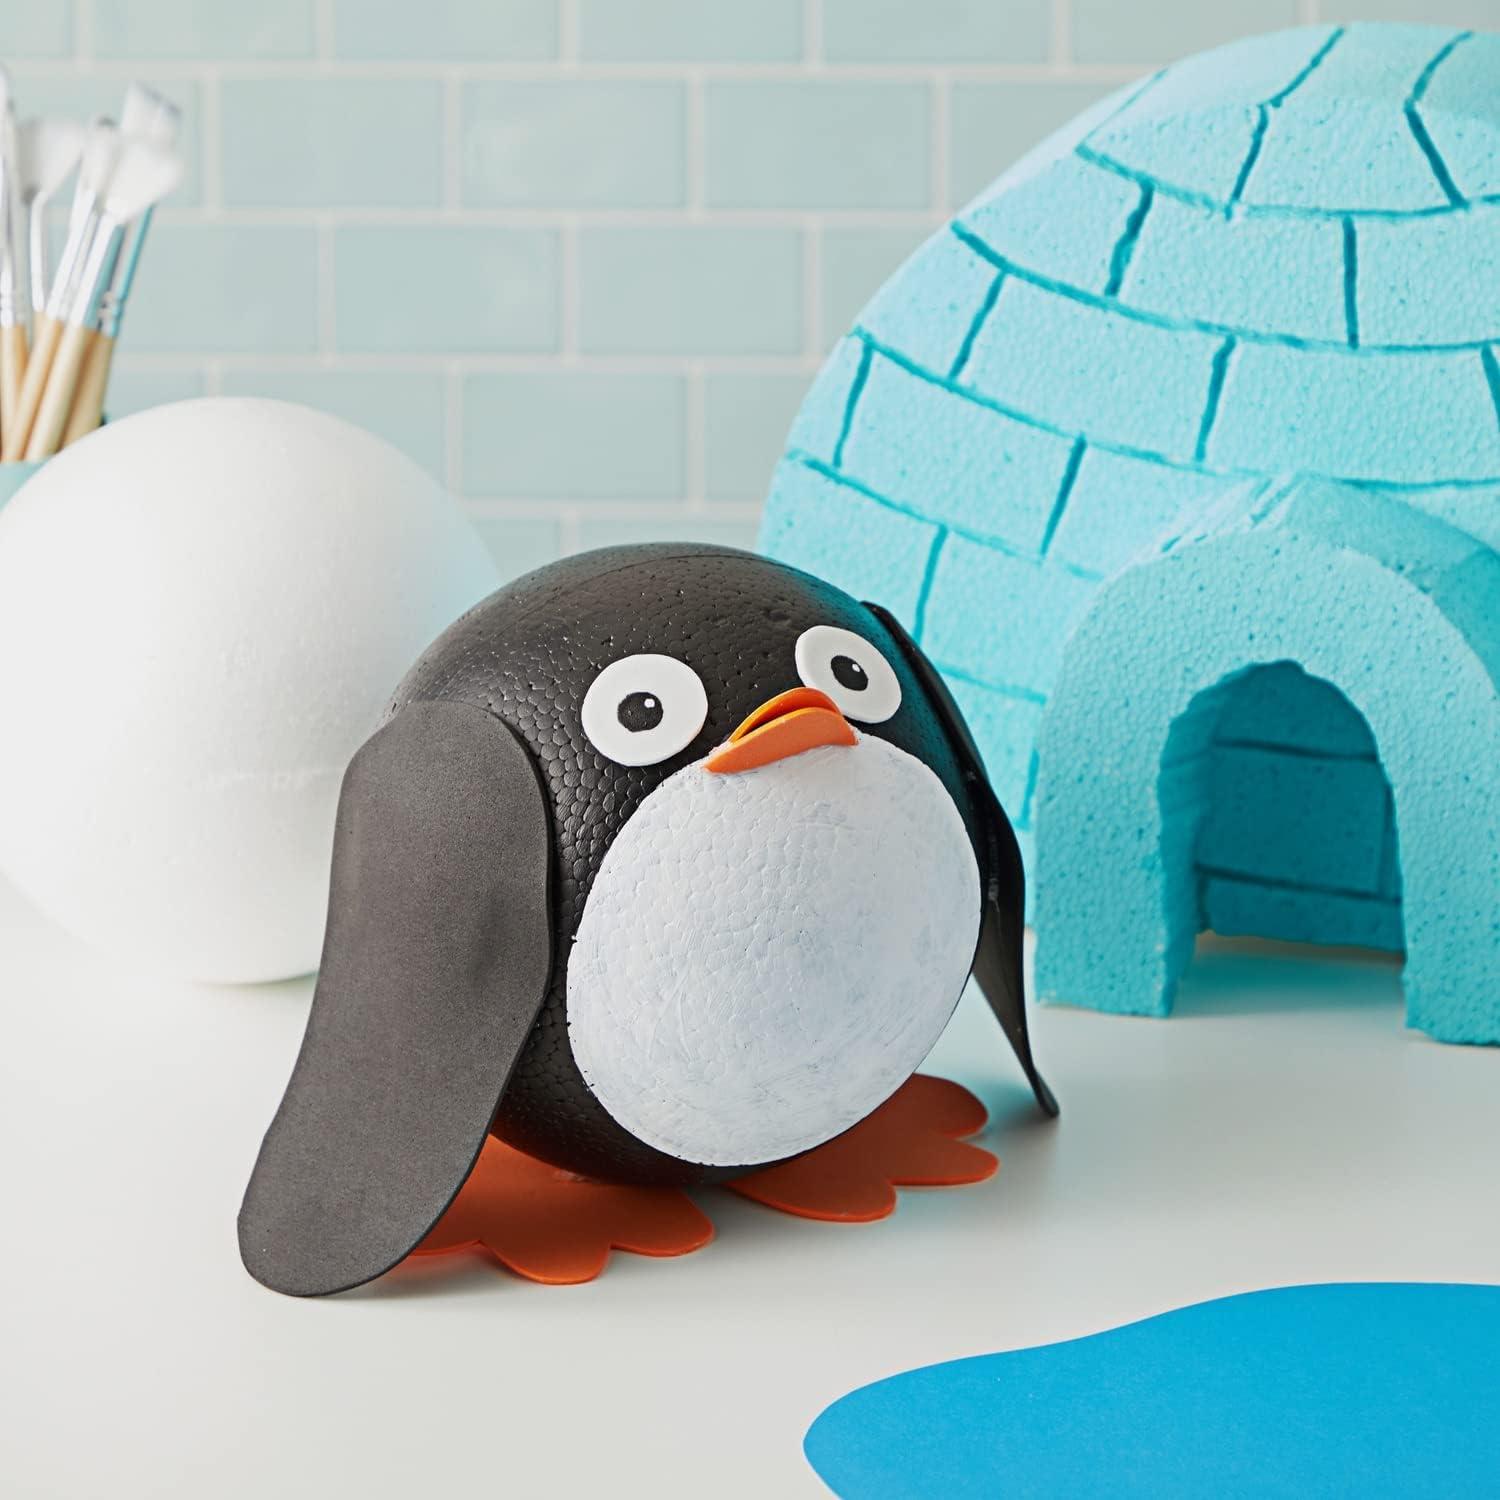 DIY Polystyrene Ball Bird and How to Make Texture Paste - A Crafty Mix